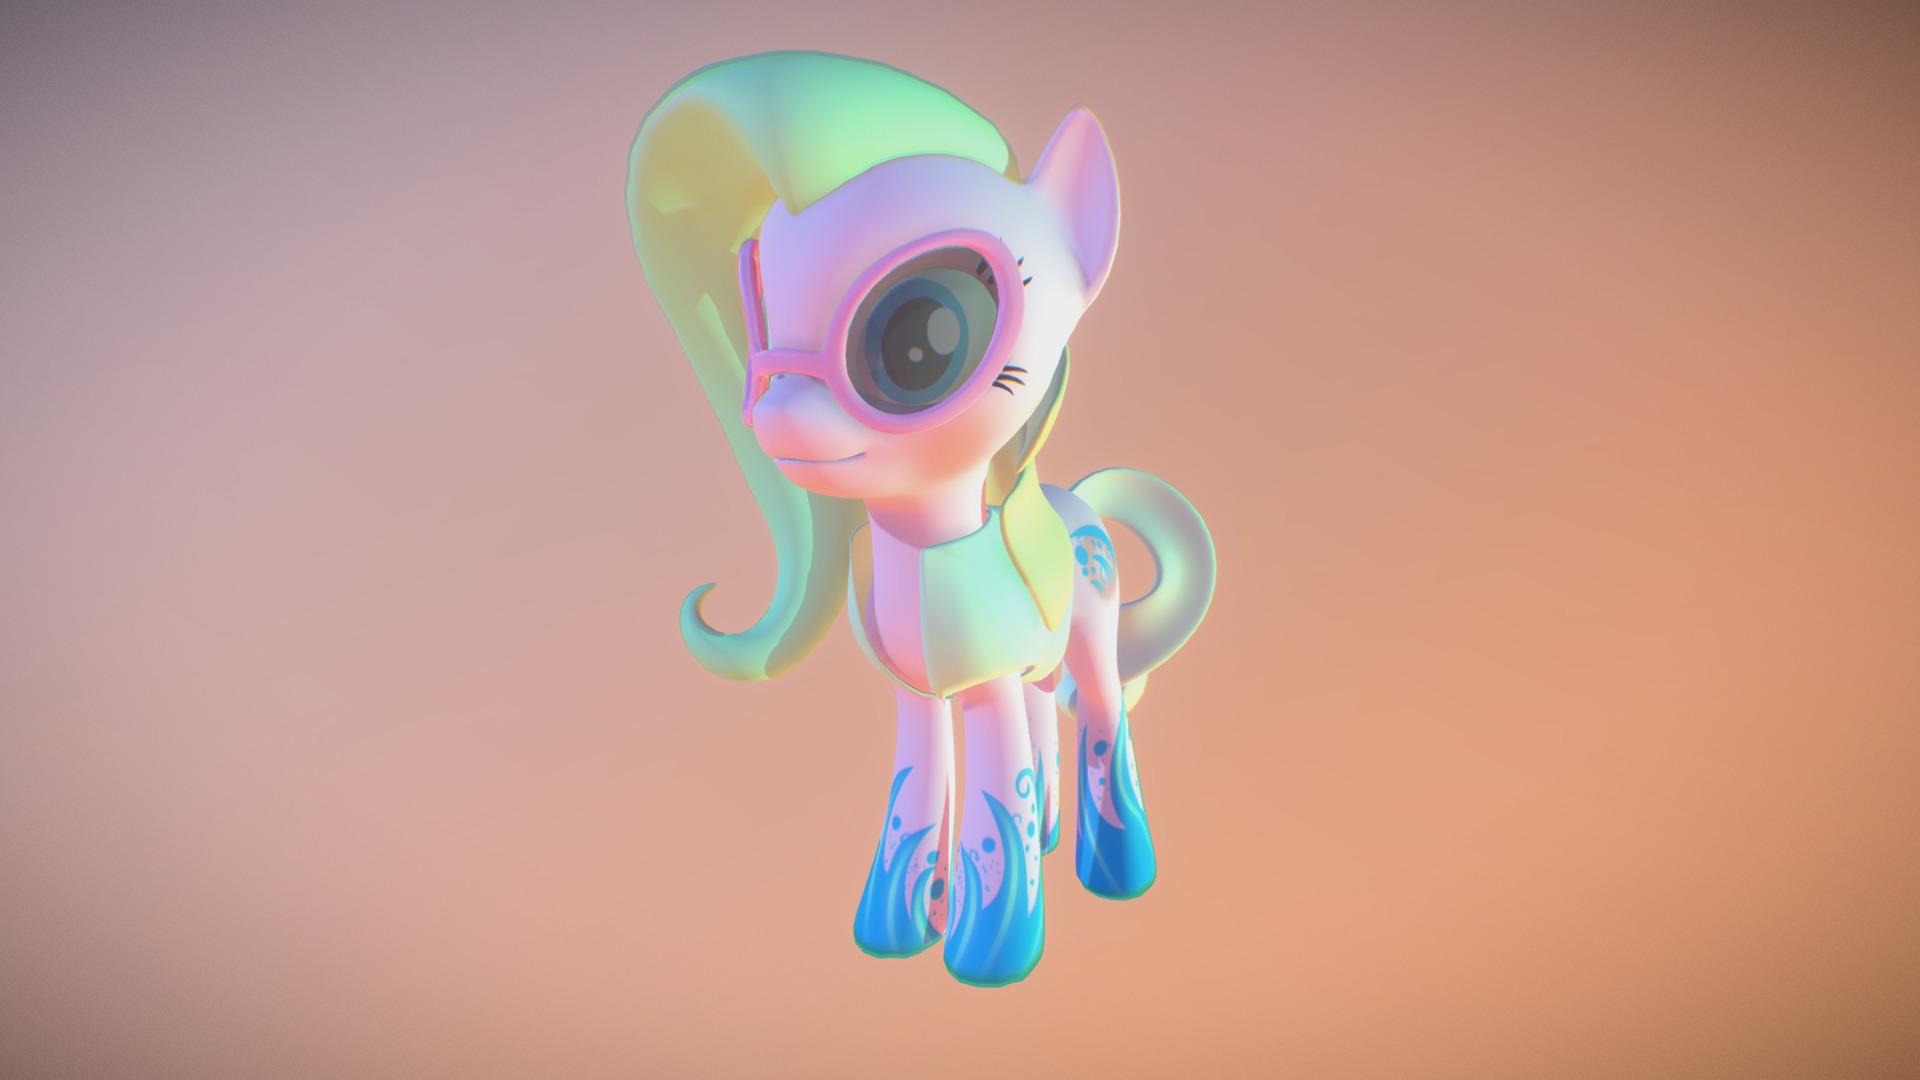 Wavy Pony ..it is my first 3d pony ever 
hope u like it 

if u want to buy one it is only costs 2$ - Wavy Pony - 3D model by mido_designer 3d model